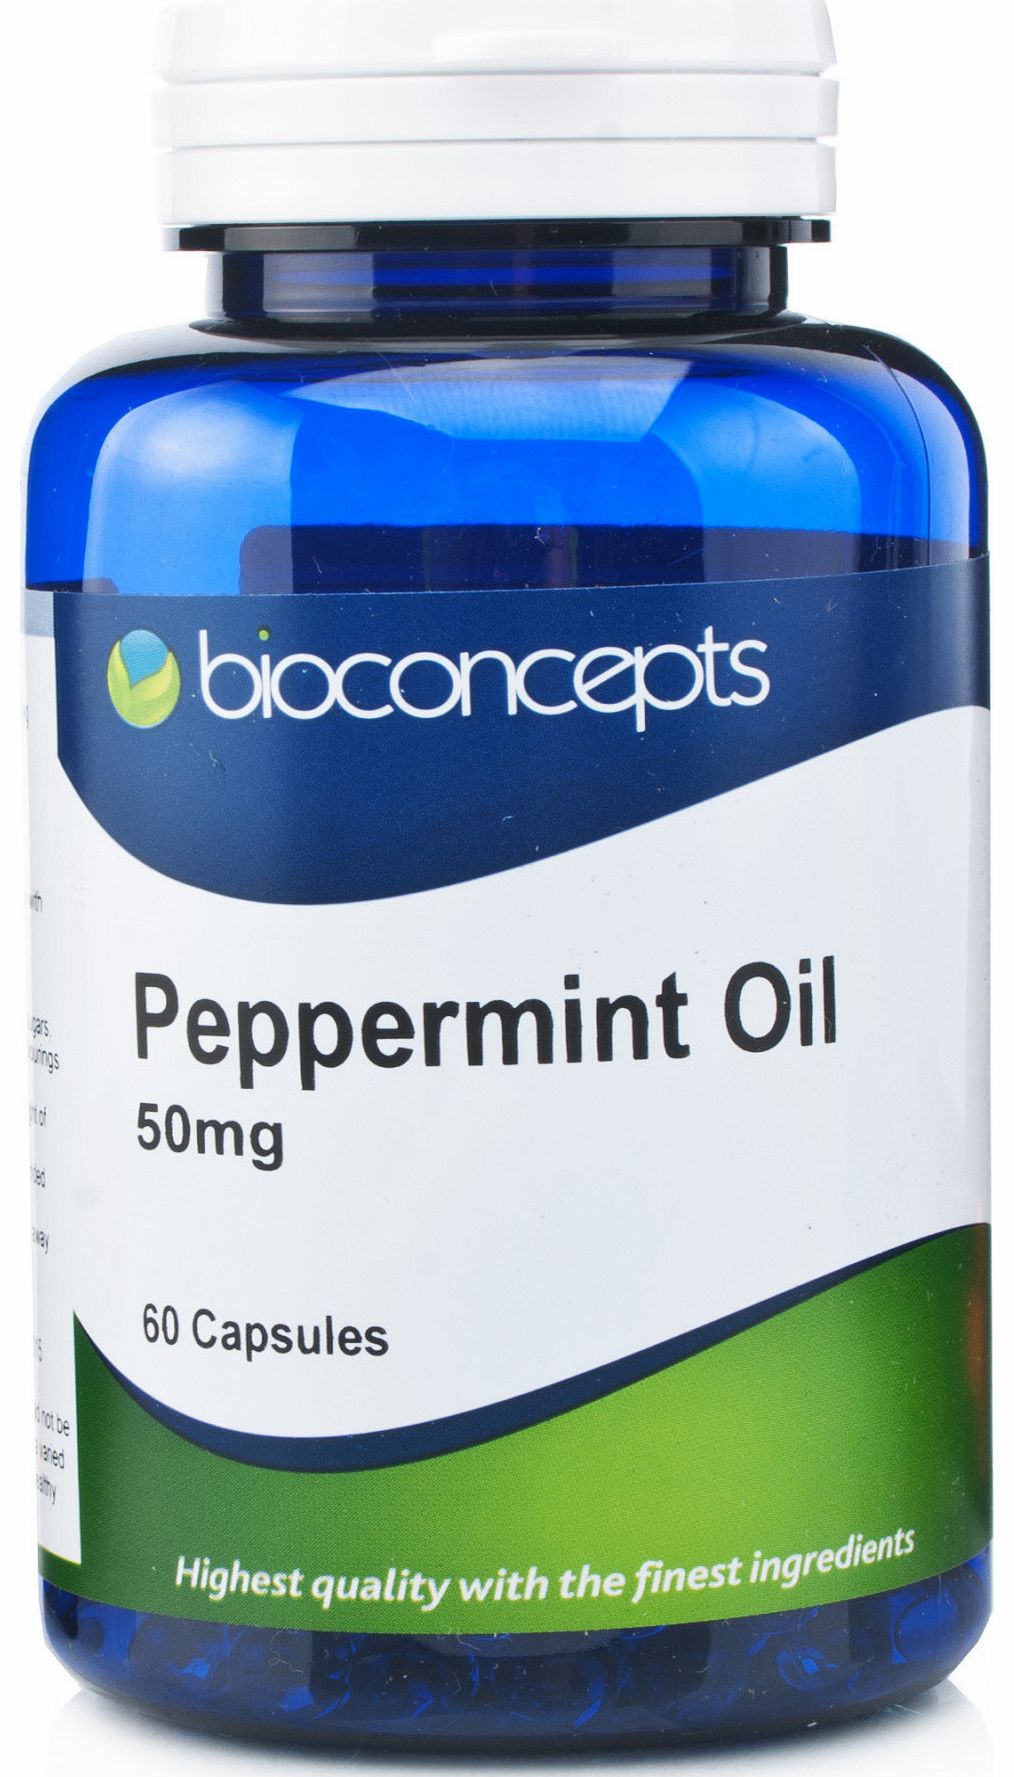 Bioconcepts Peppermint Oil 50mg Capsules